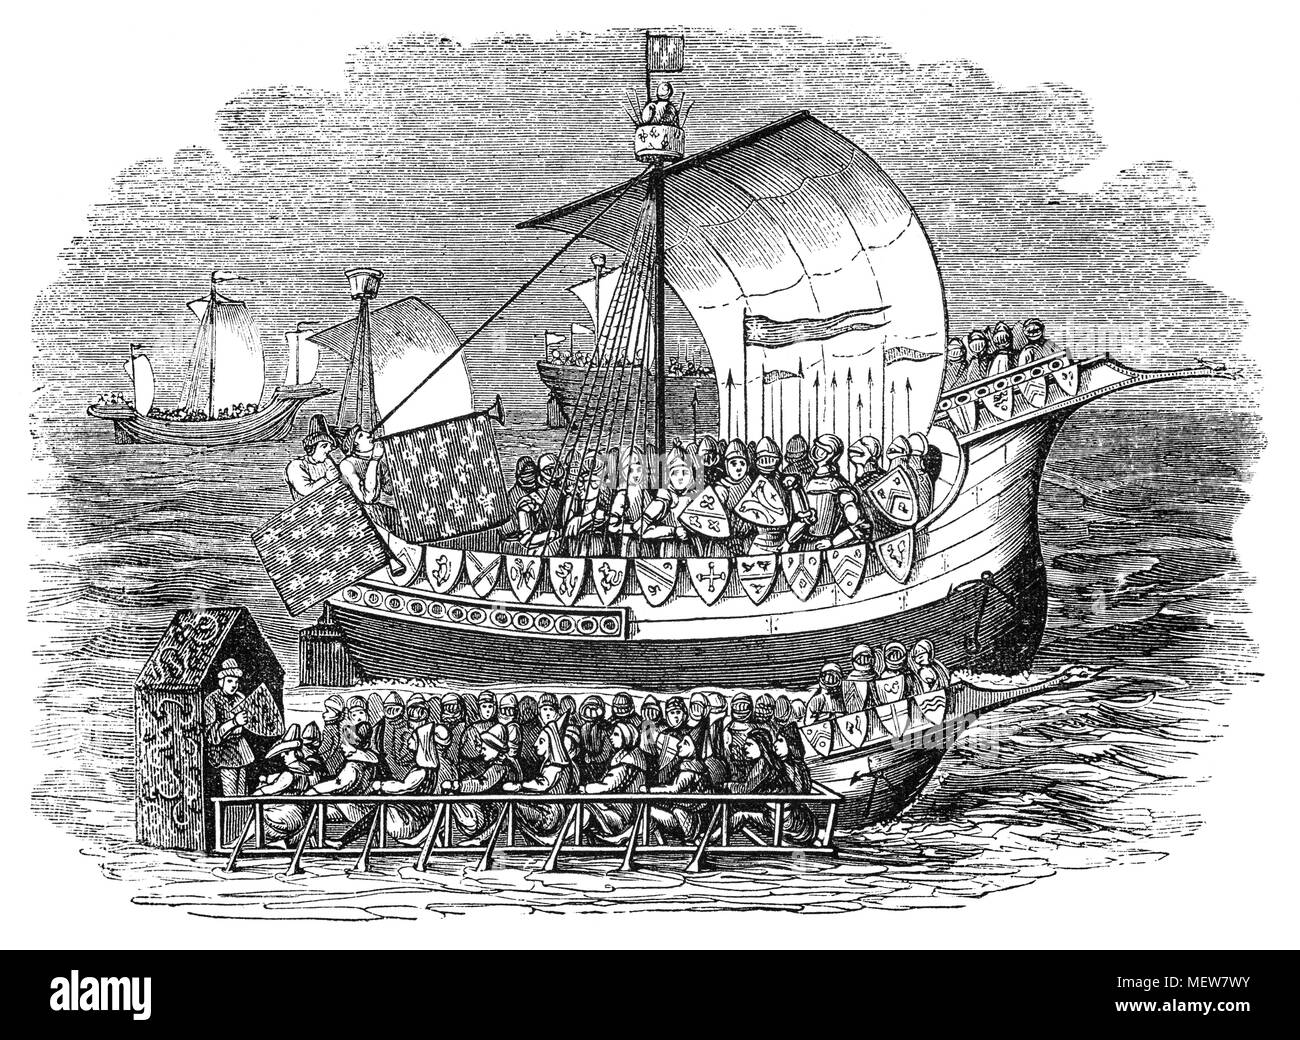 15th Century Medieval English ships of warwere powered by sail or oar, or both. Frequent communications withEurope meant exposure to a variety of improvements. Ships in the north were influenced by Viking vessels, while those in the south by classical or Roman vessels. However, there was technological change as traditional construction methods were changed from clinker to carvel construction, which would dominate the building of large ships. The period would also see a shift from the steering oar or side rudder to the stern rudder and the development from single to multi-masted ships. Stock Photo